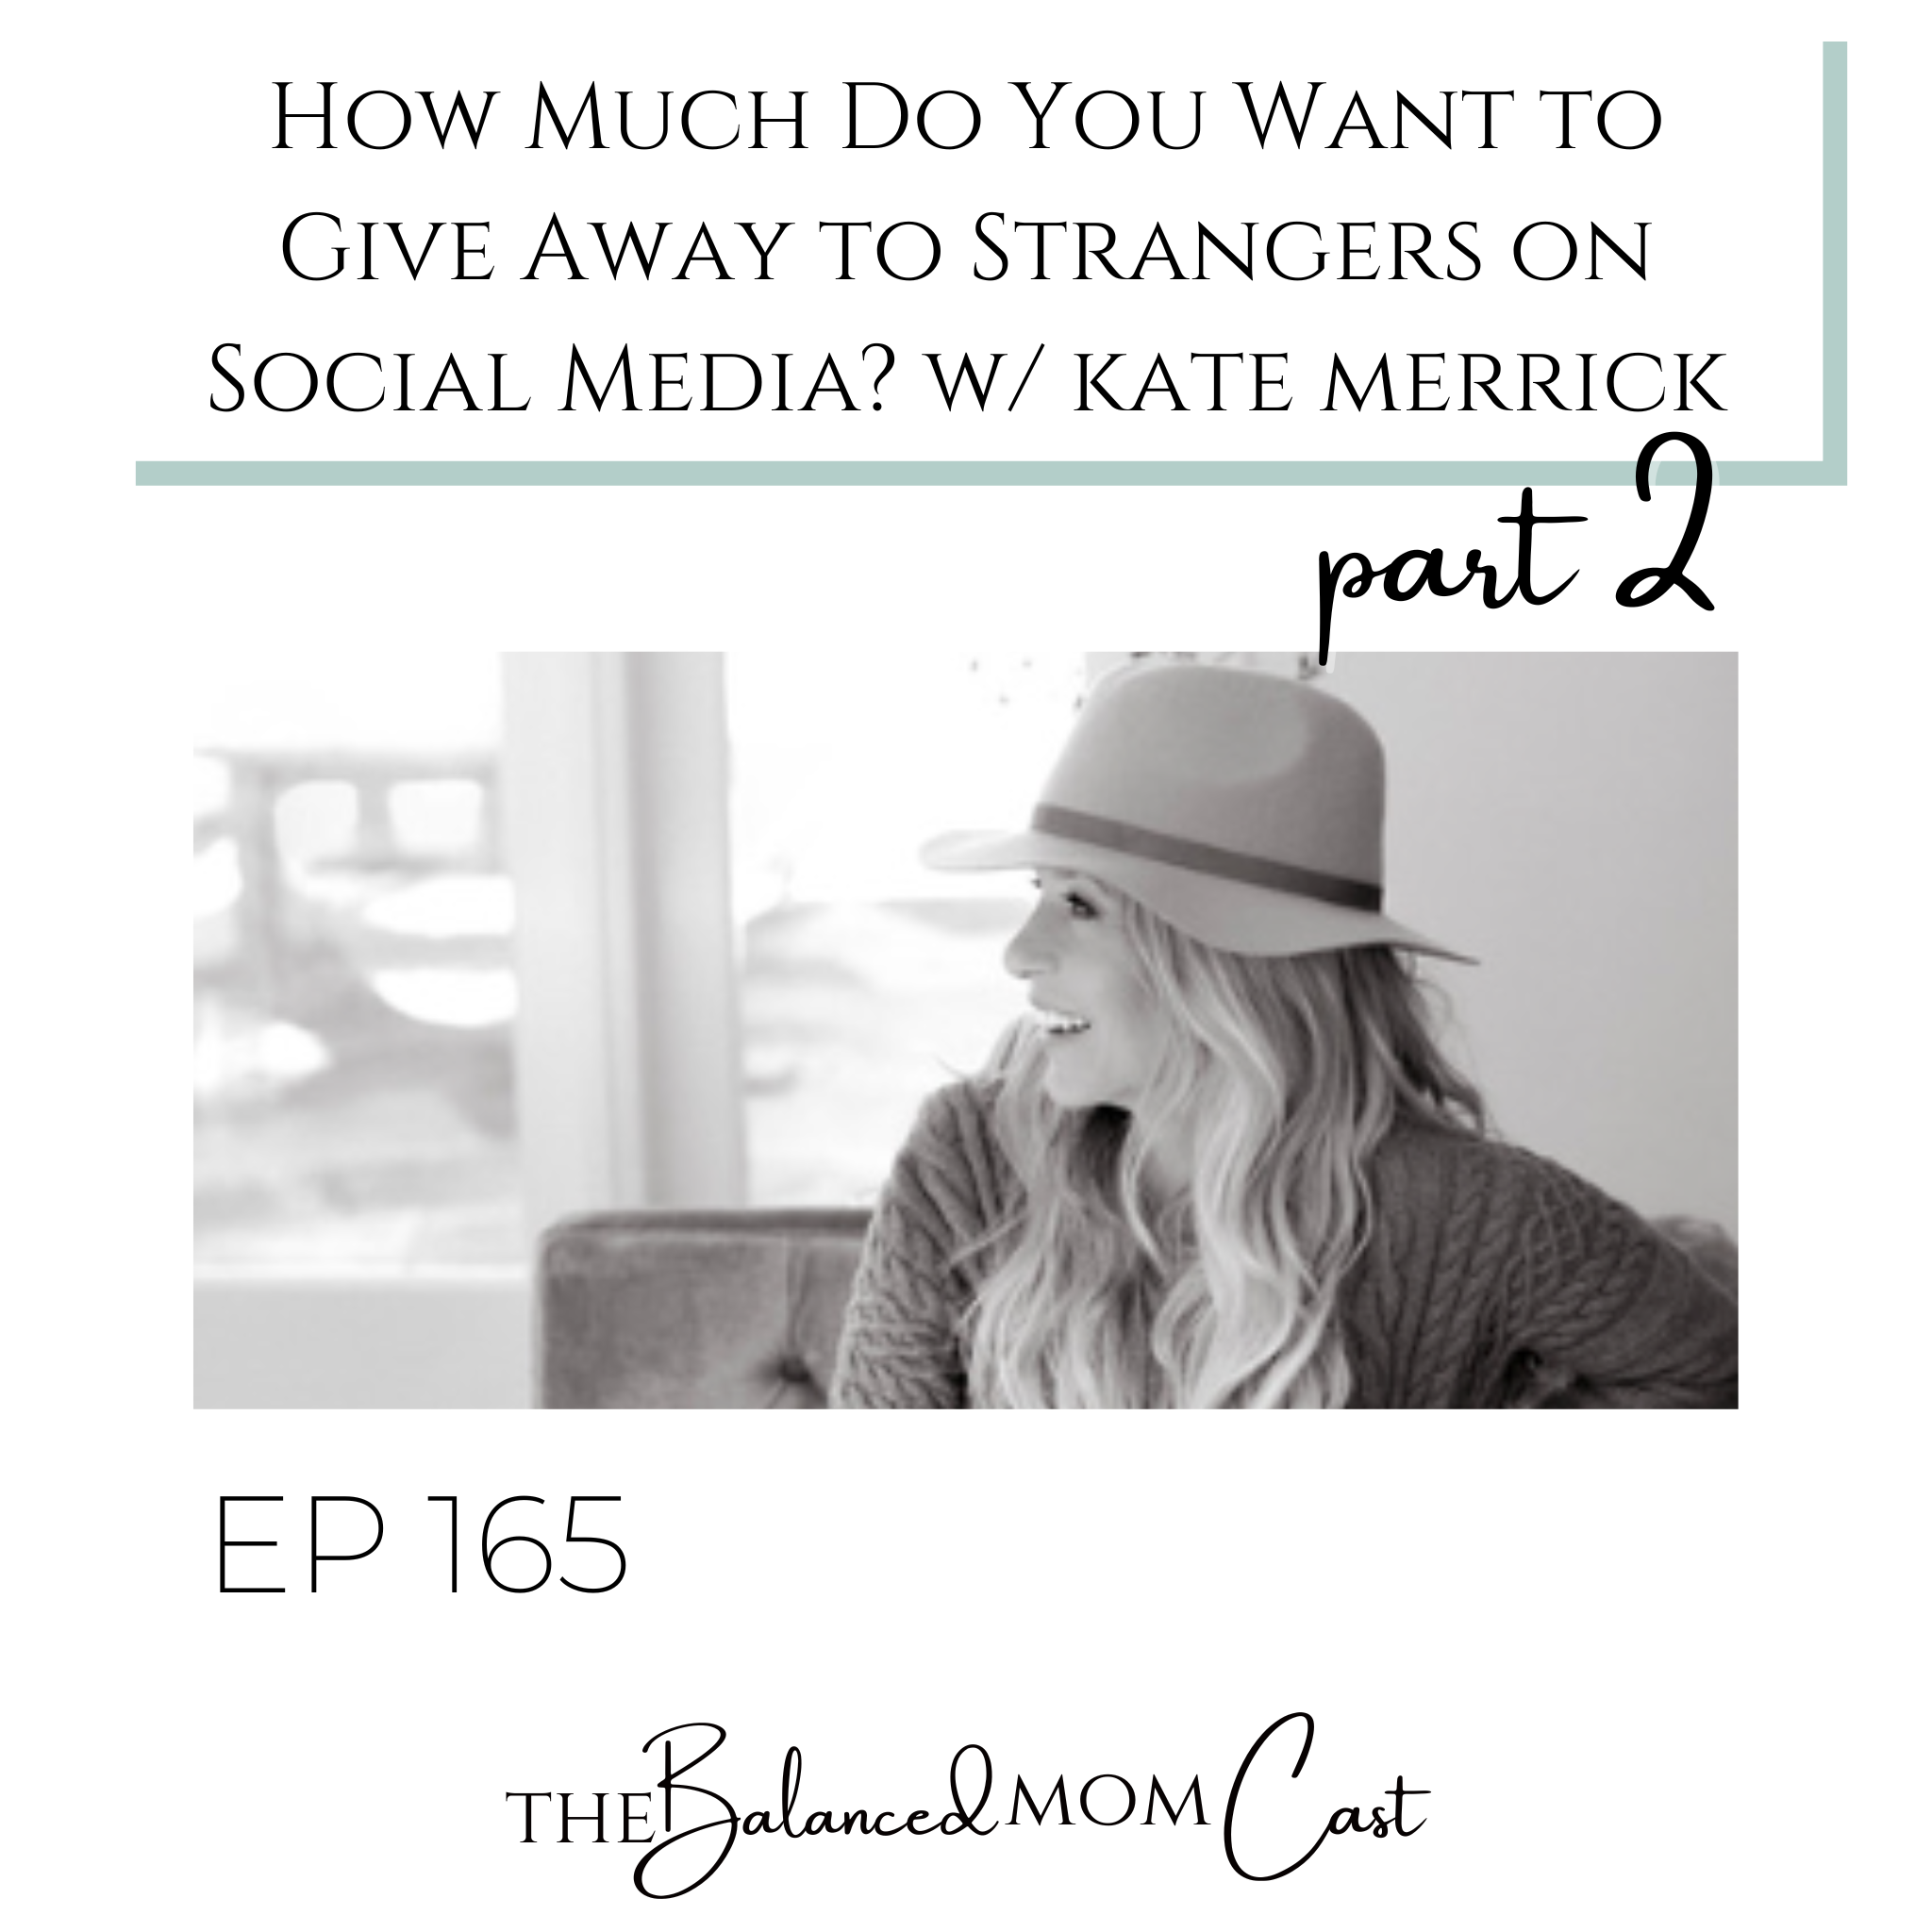 Ep 165: How Much Do You Want to Give Away to Strangers on Social Media? Kate Merrick, Part 2